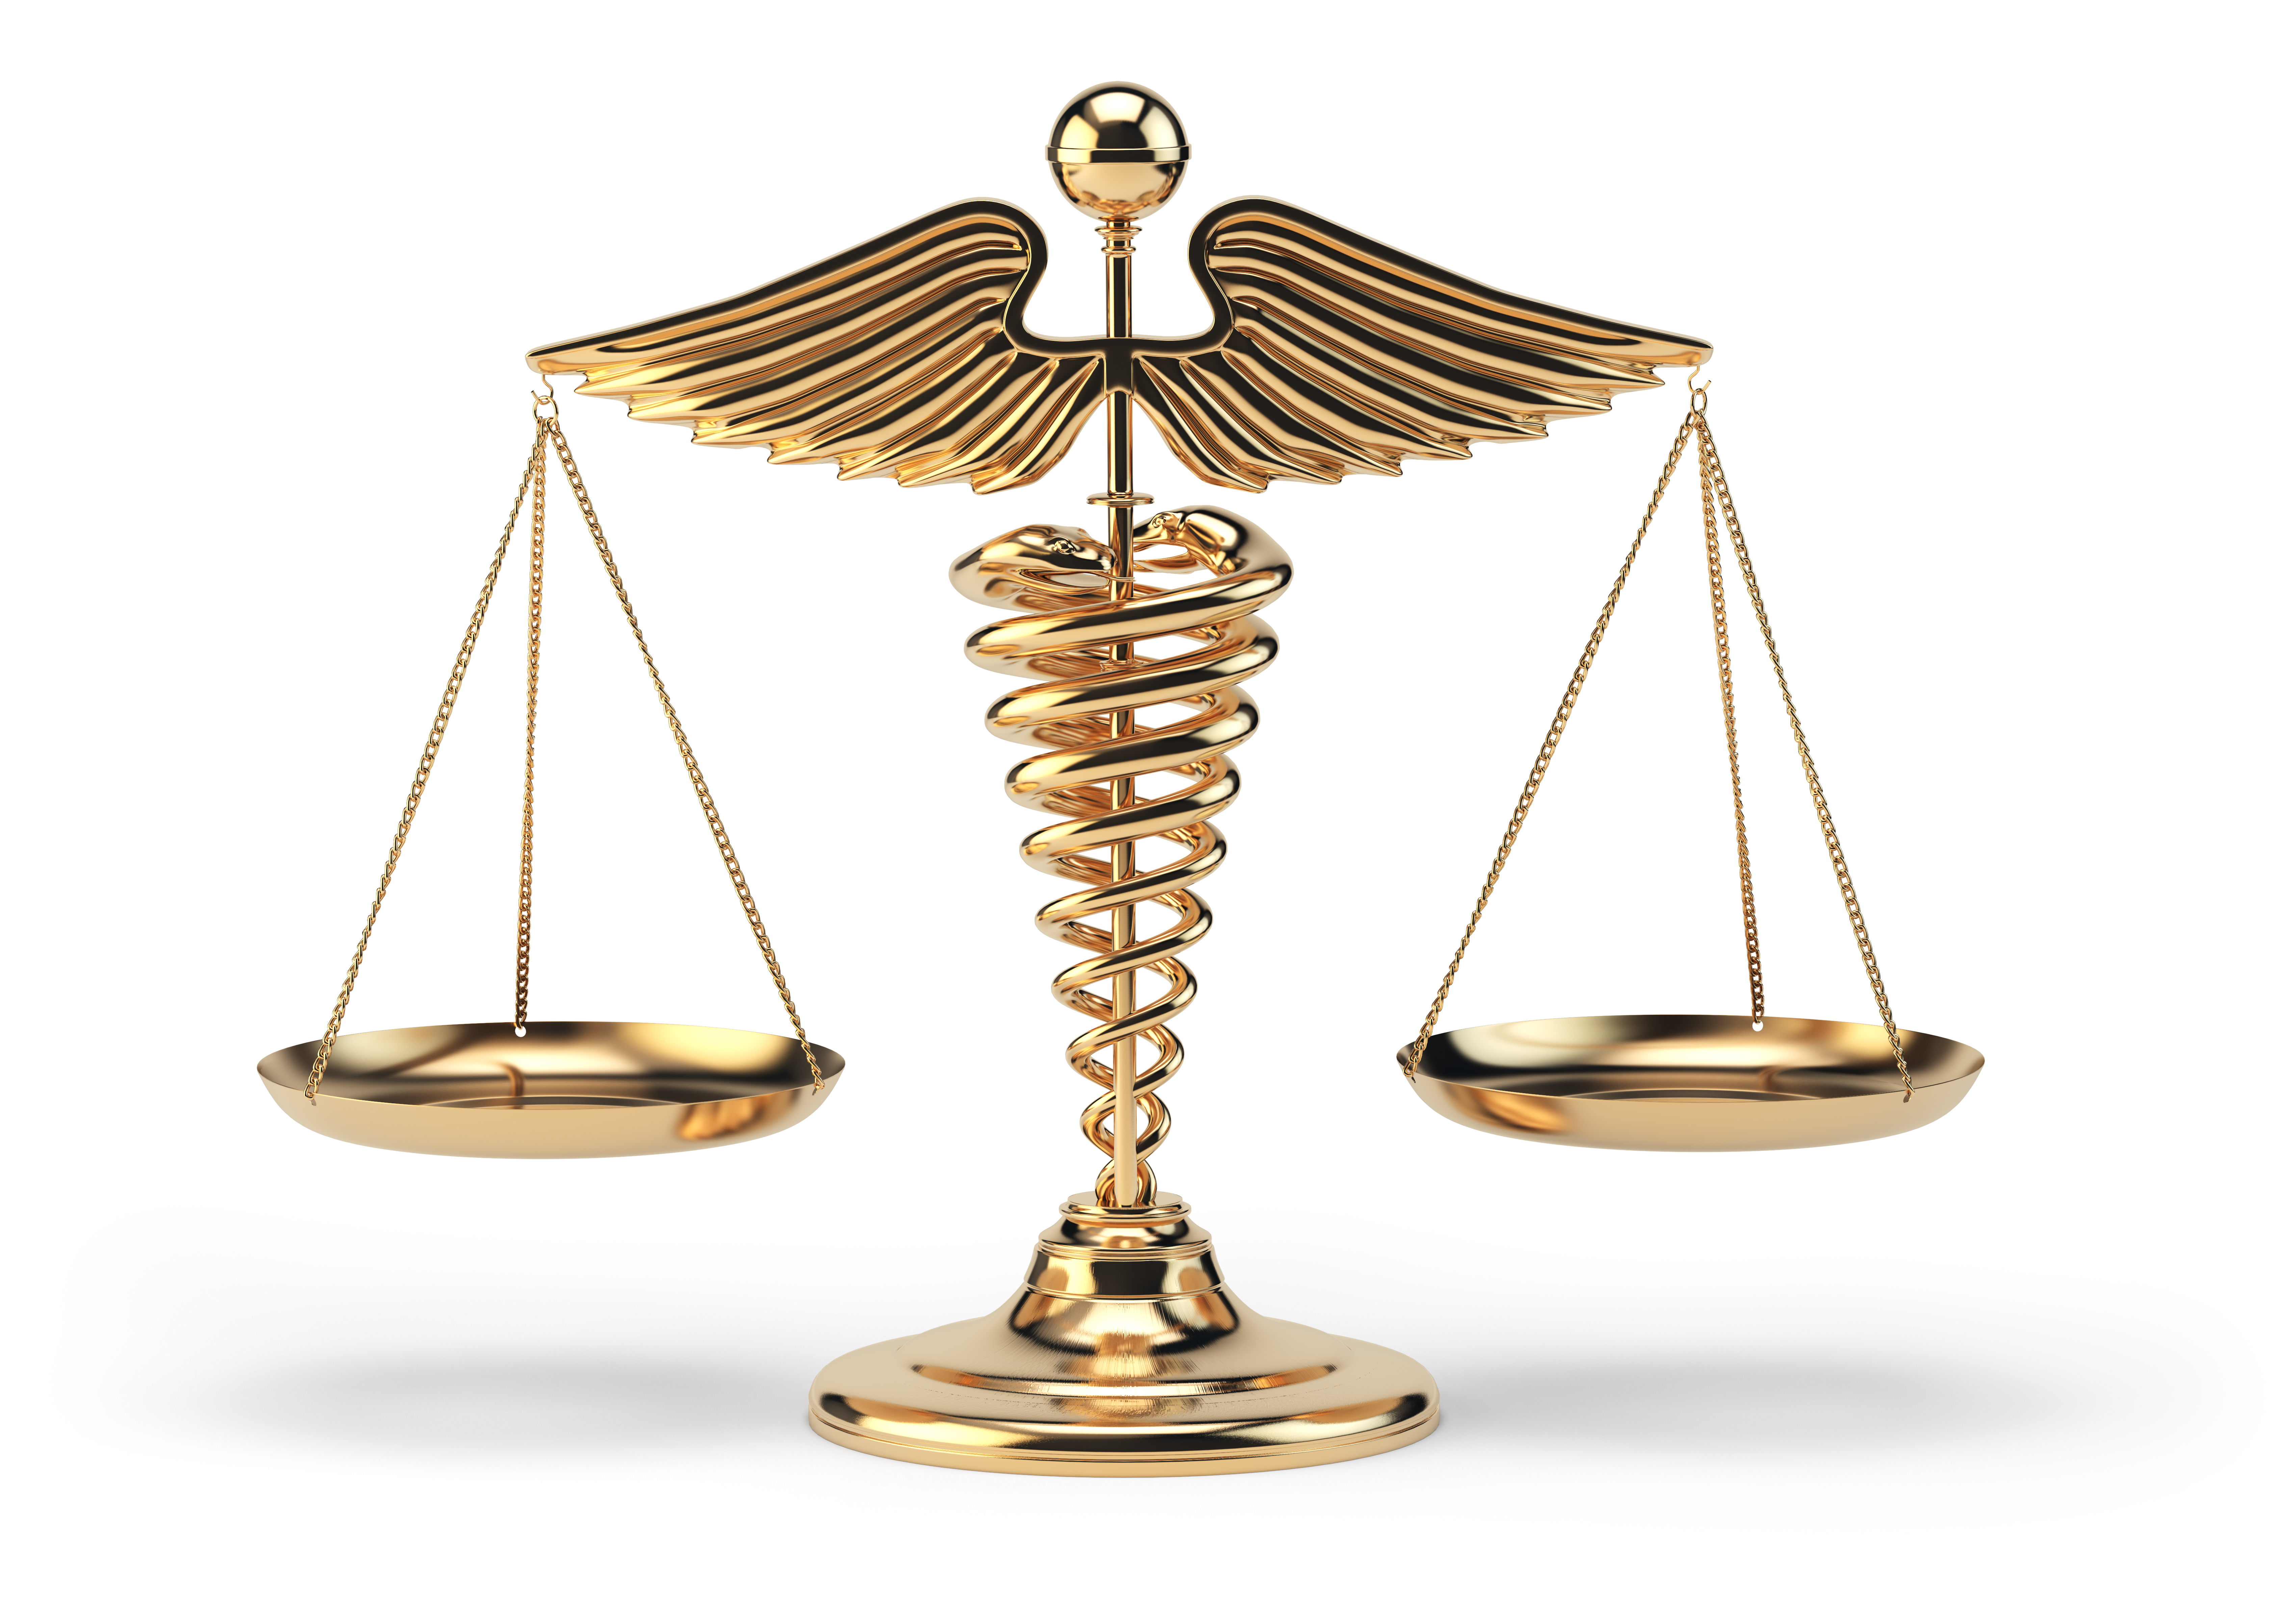 Medical caduceus symbol staff of Hermes holding up legal scales